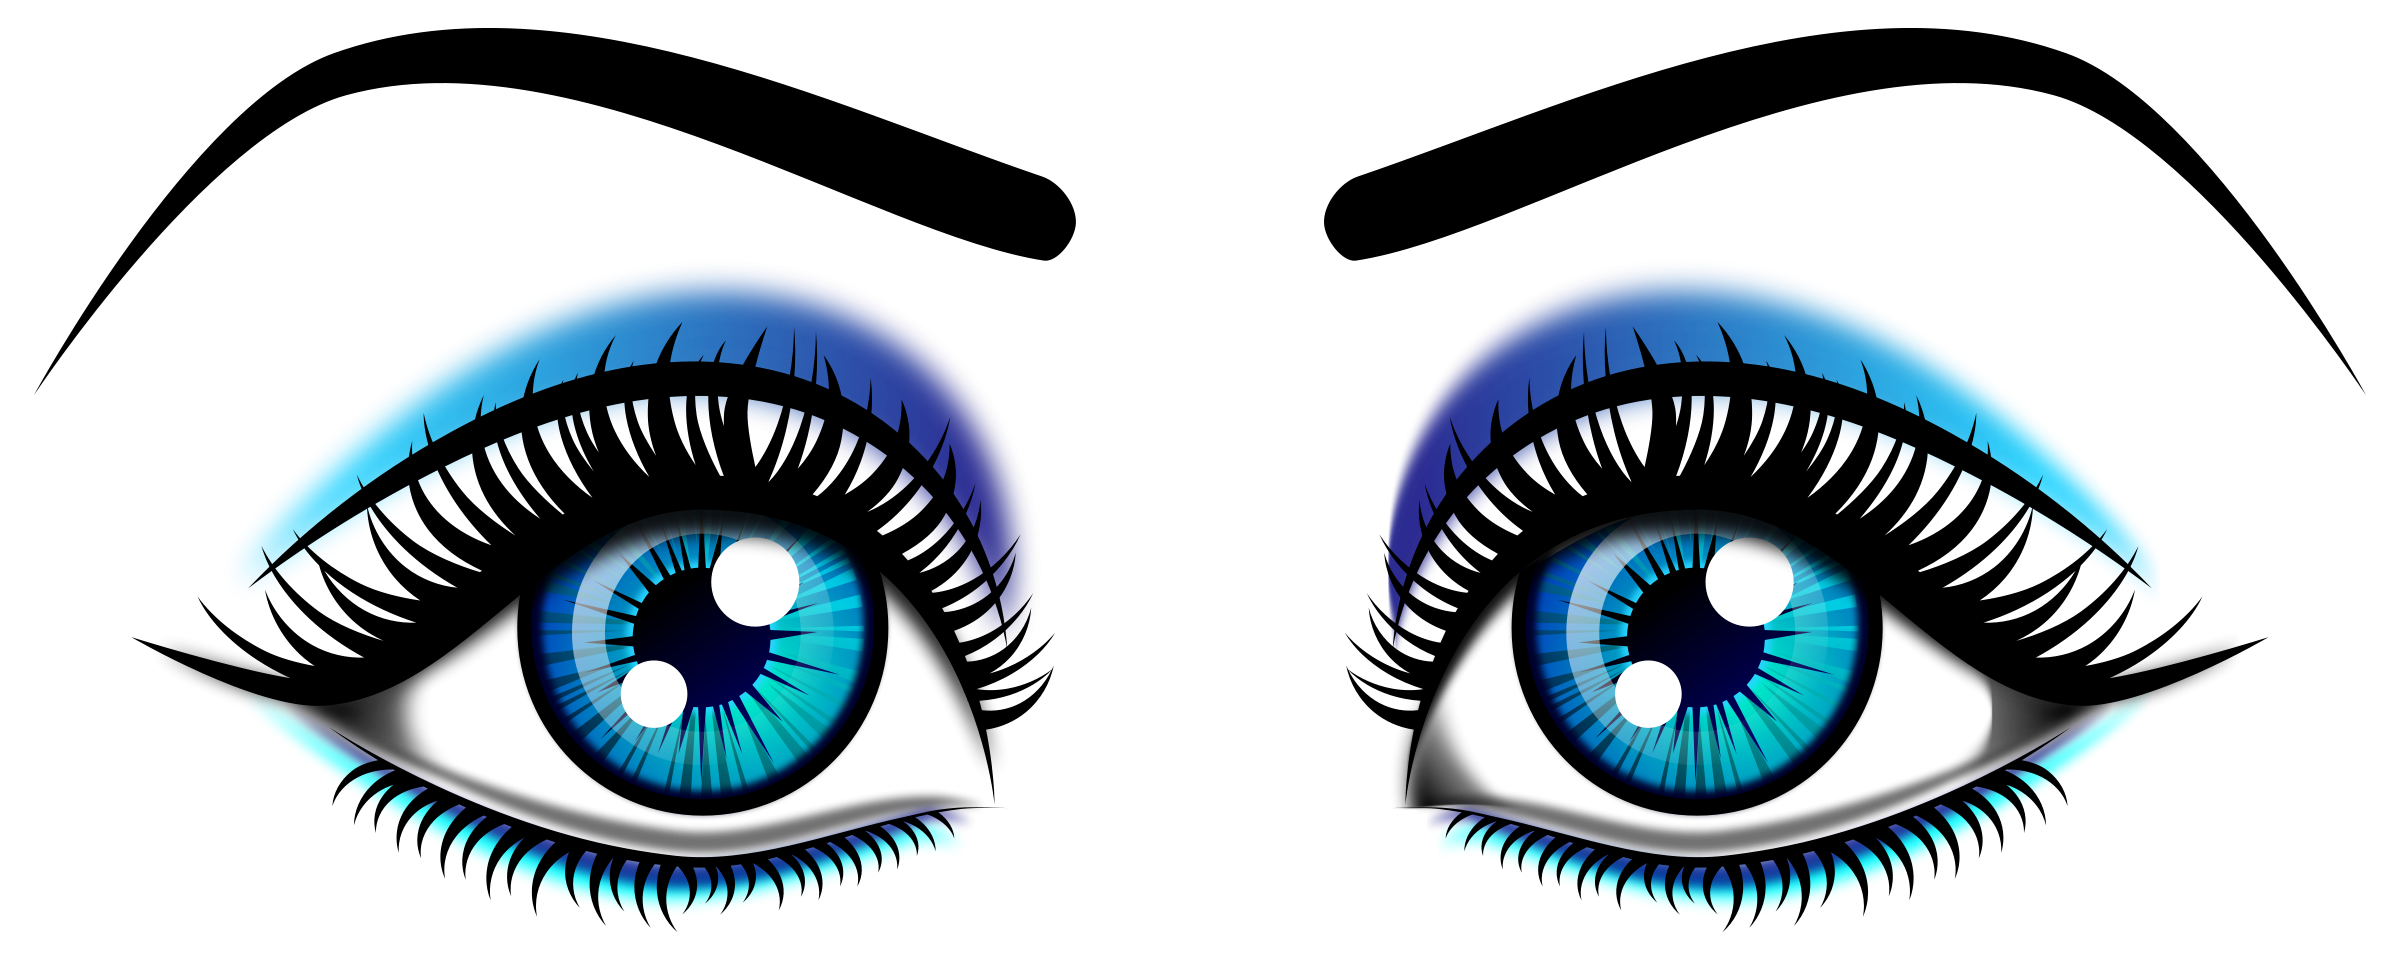 Eyes Watching You Clipart   Cliparthut   Free Clipart